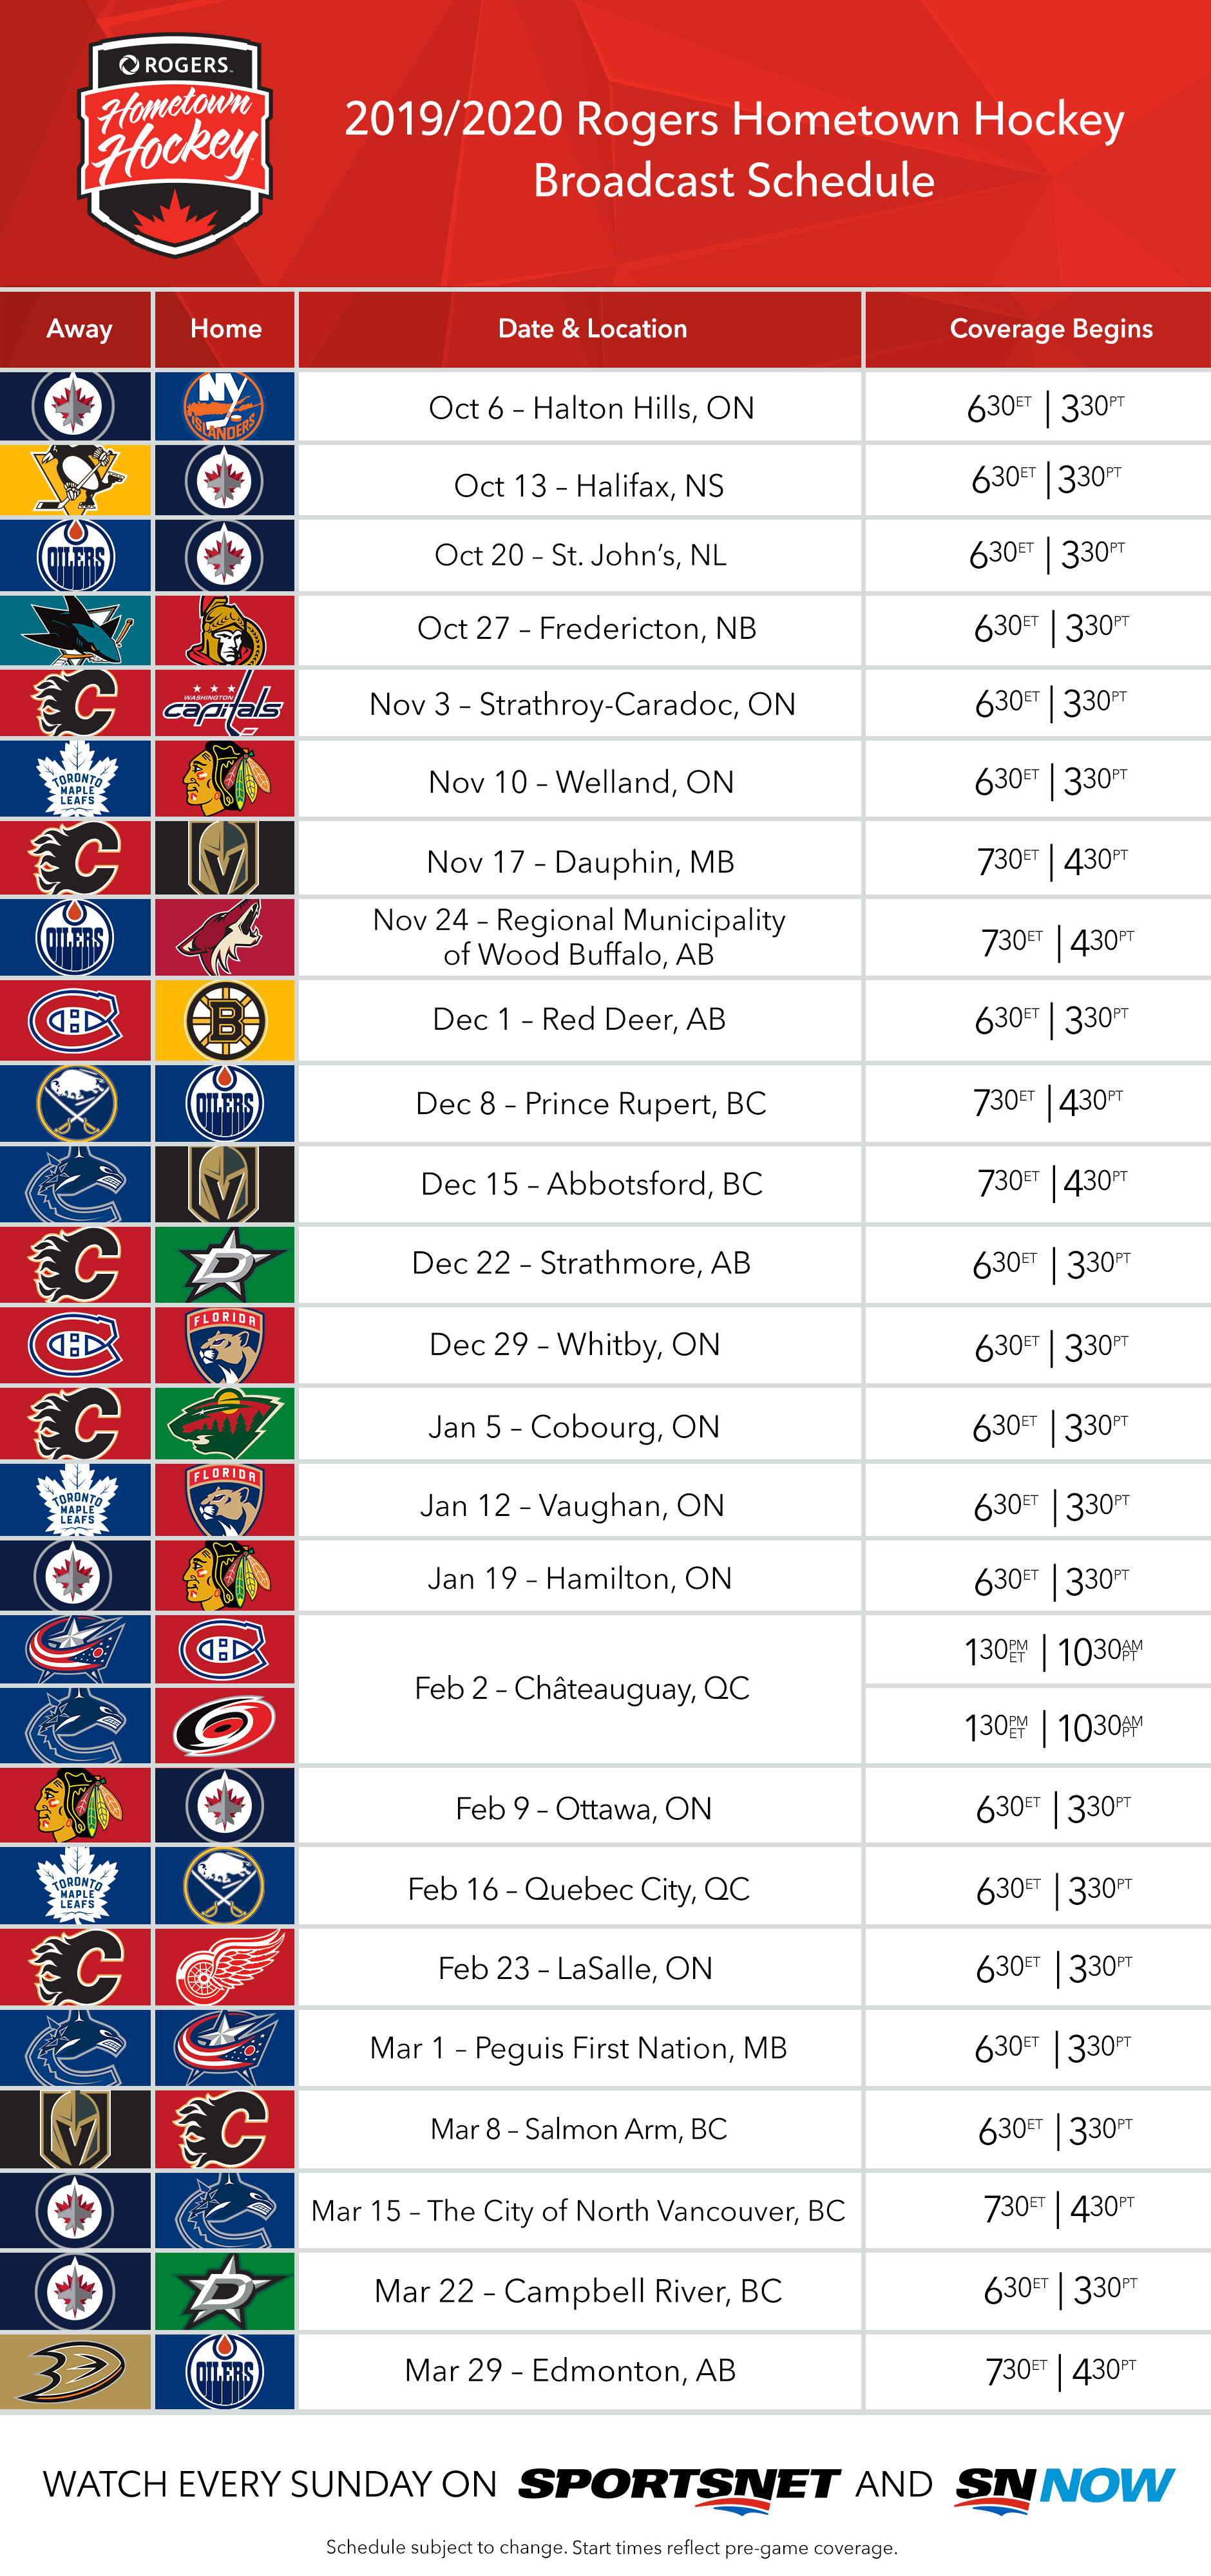 Rogers Hometown Hockey releases full tour schedule for 2019-20